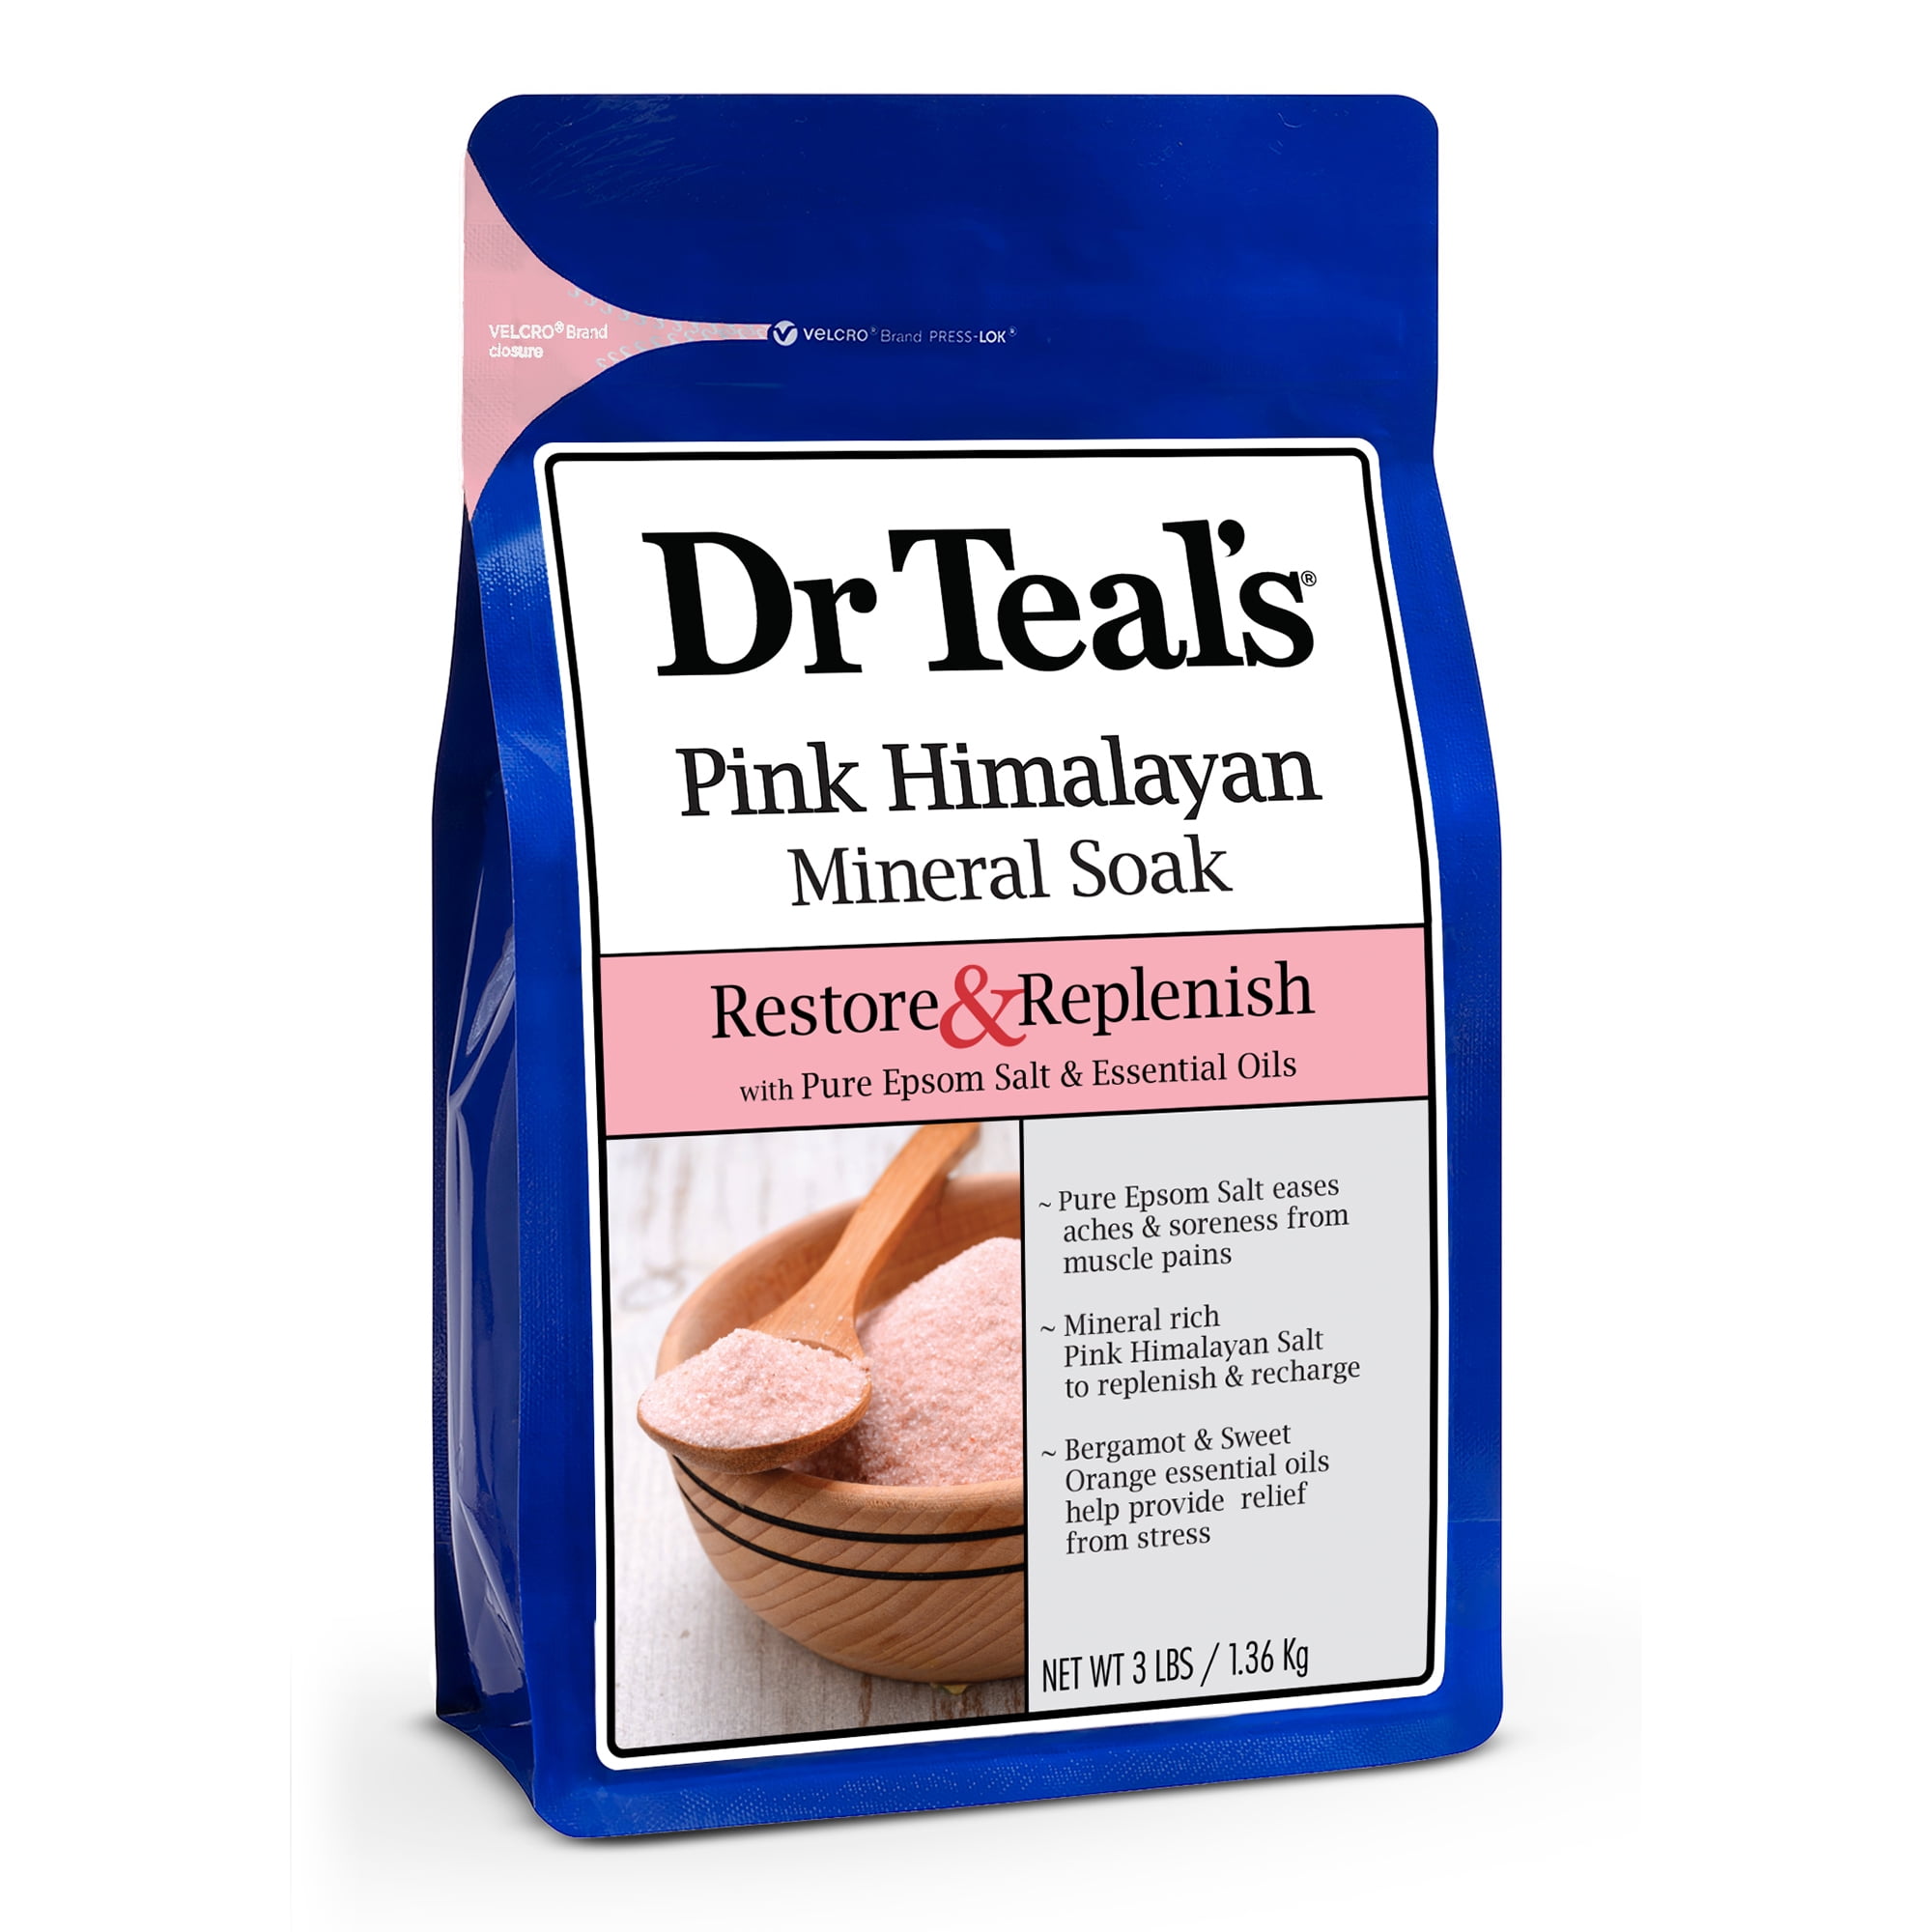 Dr Teal's Pink Himalayan Mineral Soak, Restore & Replenish with Pure Epsom Salt, 3lbs